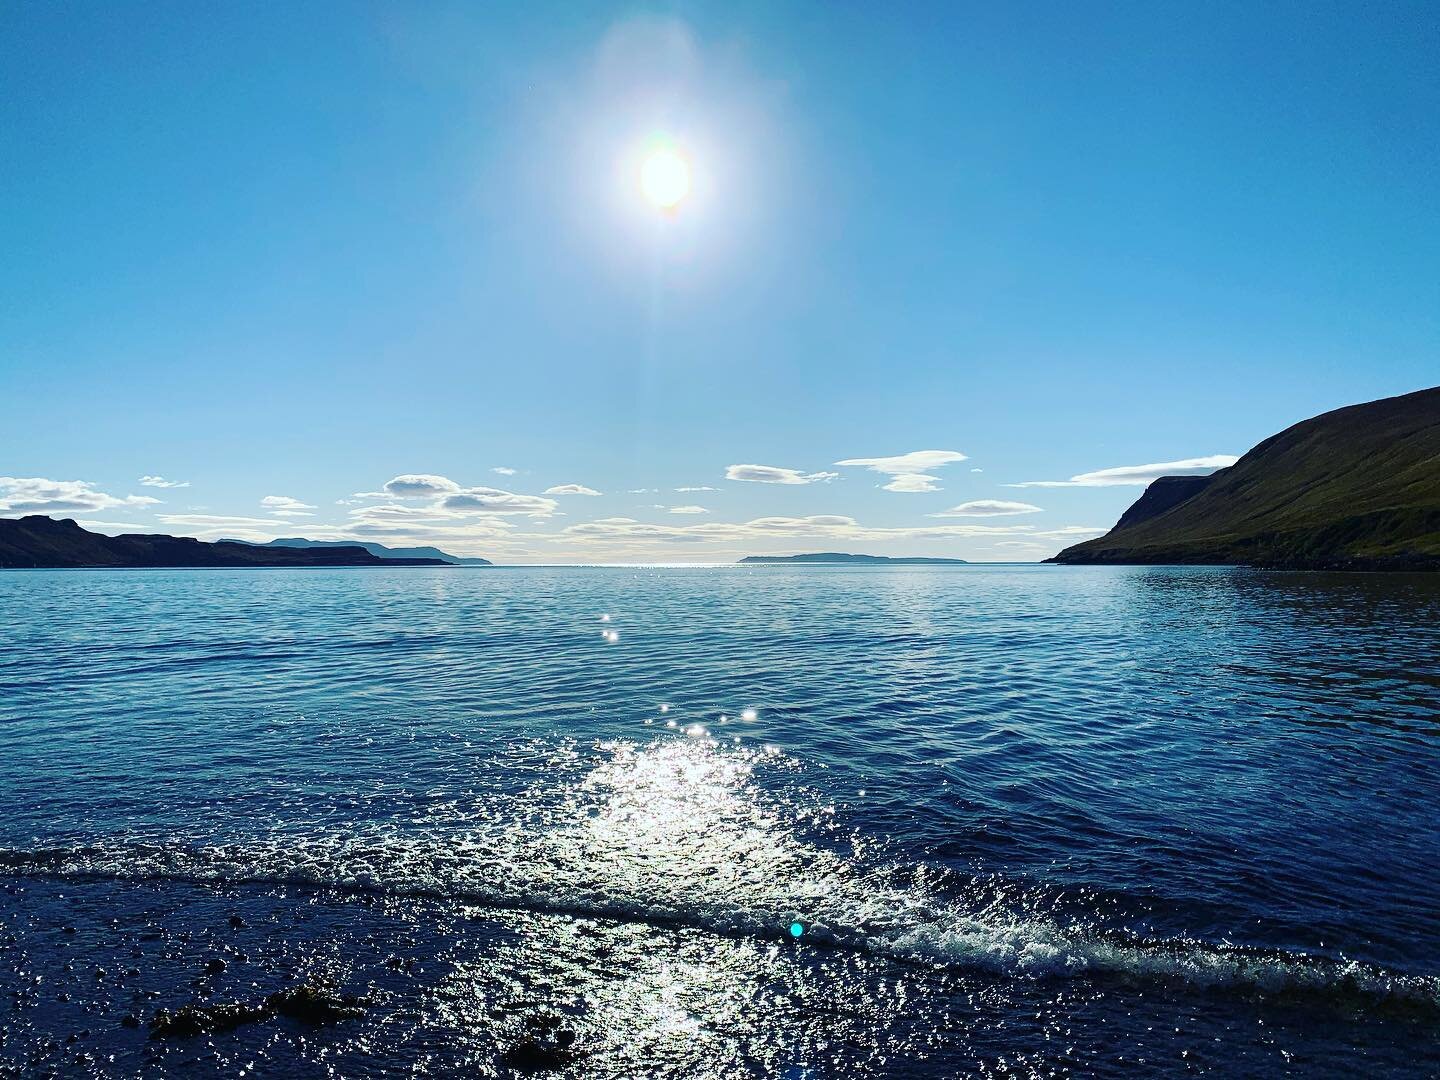 This is the bay at @glenbrittlecampsite , Isle of Skye! 
Such a raw beautiful location, so peaceful and tranquil!
.
.
.
.
#newmotorhome #motorhomeforhire  #freedommotorhomes #freetoexplore #freetoroam #freetobe #freedom  #findyourfreedom #freedommoto